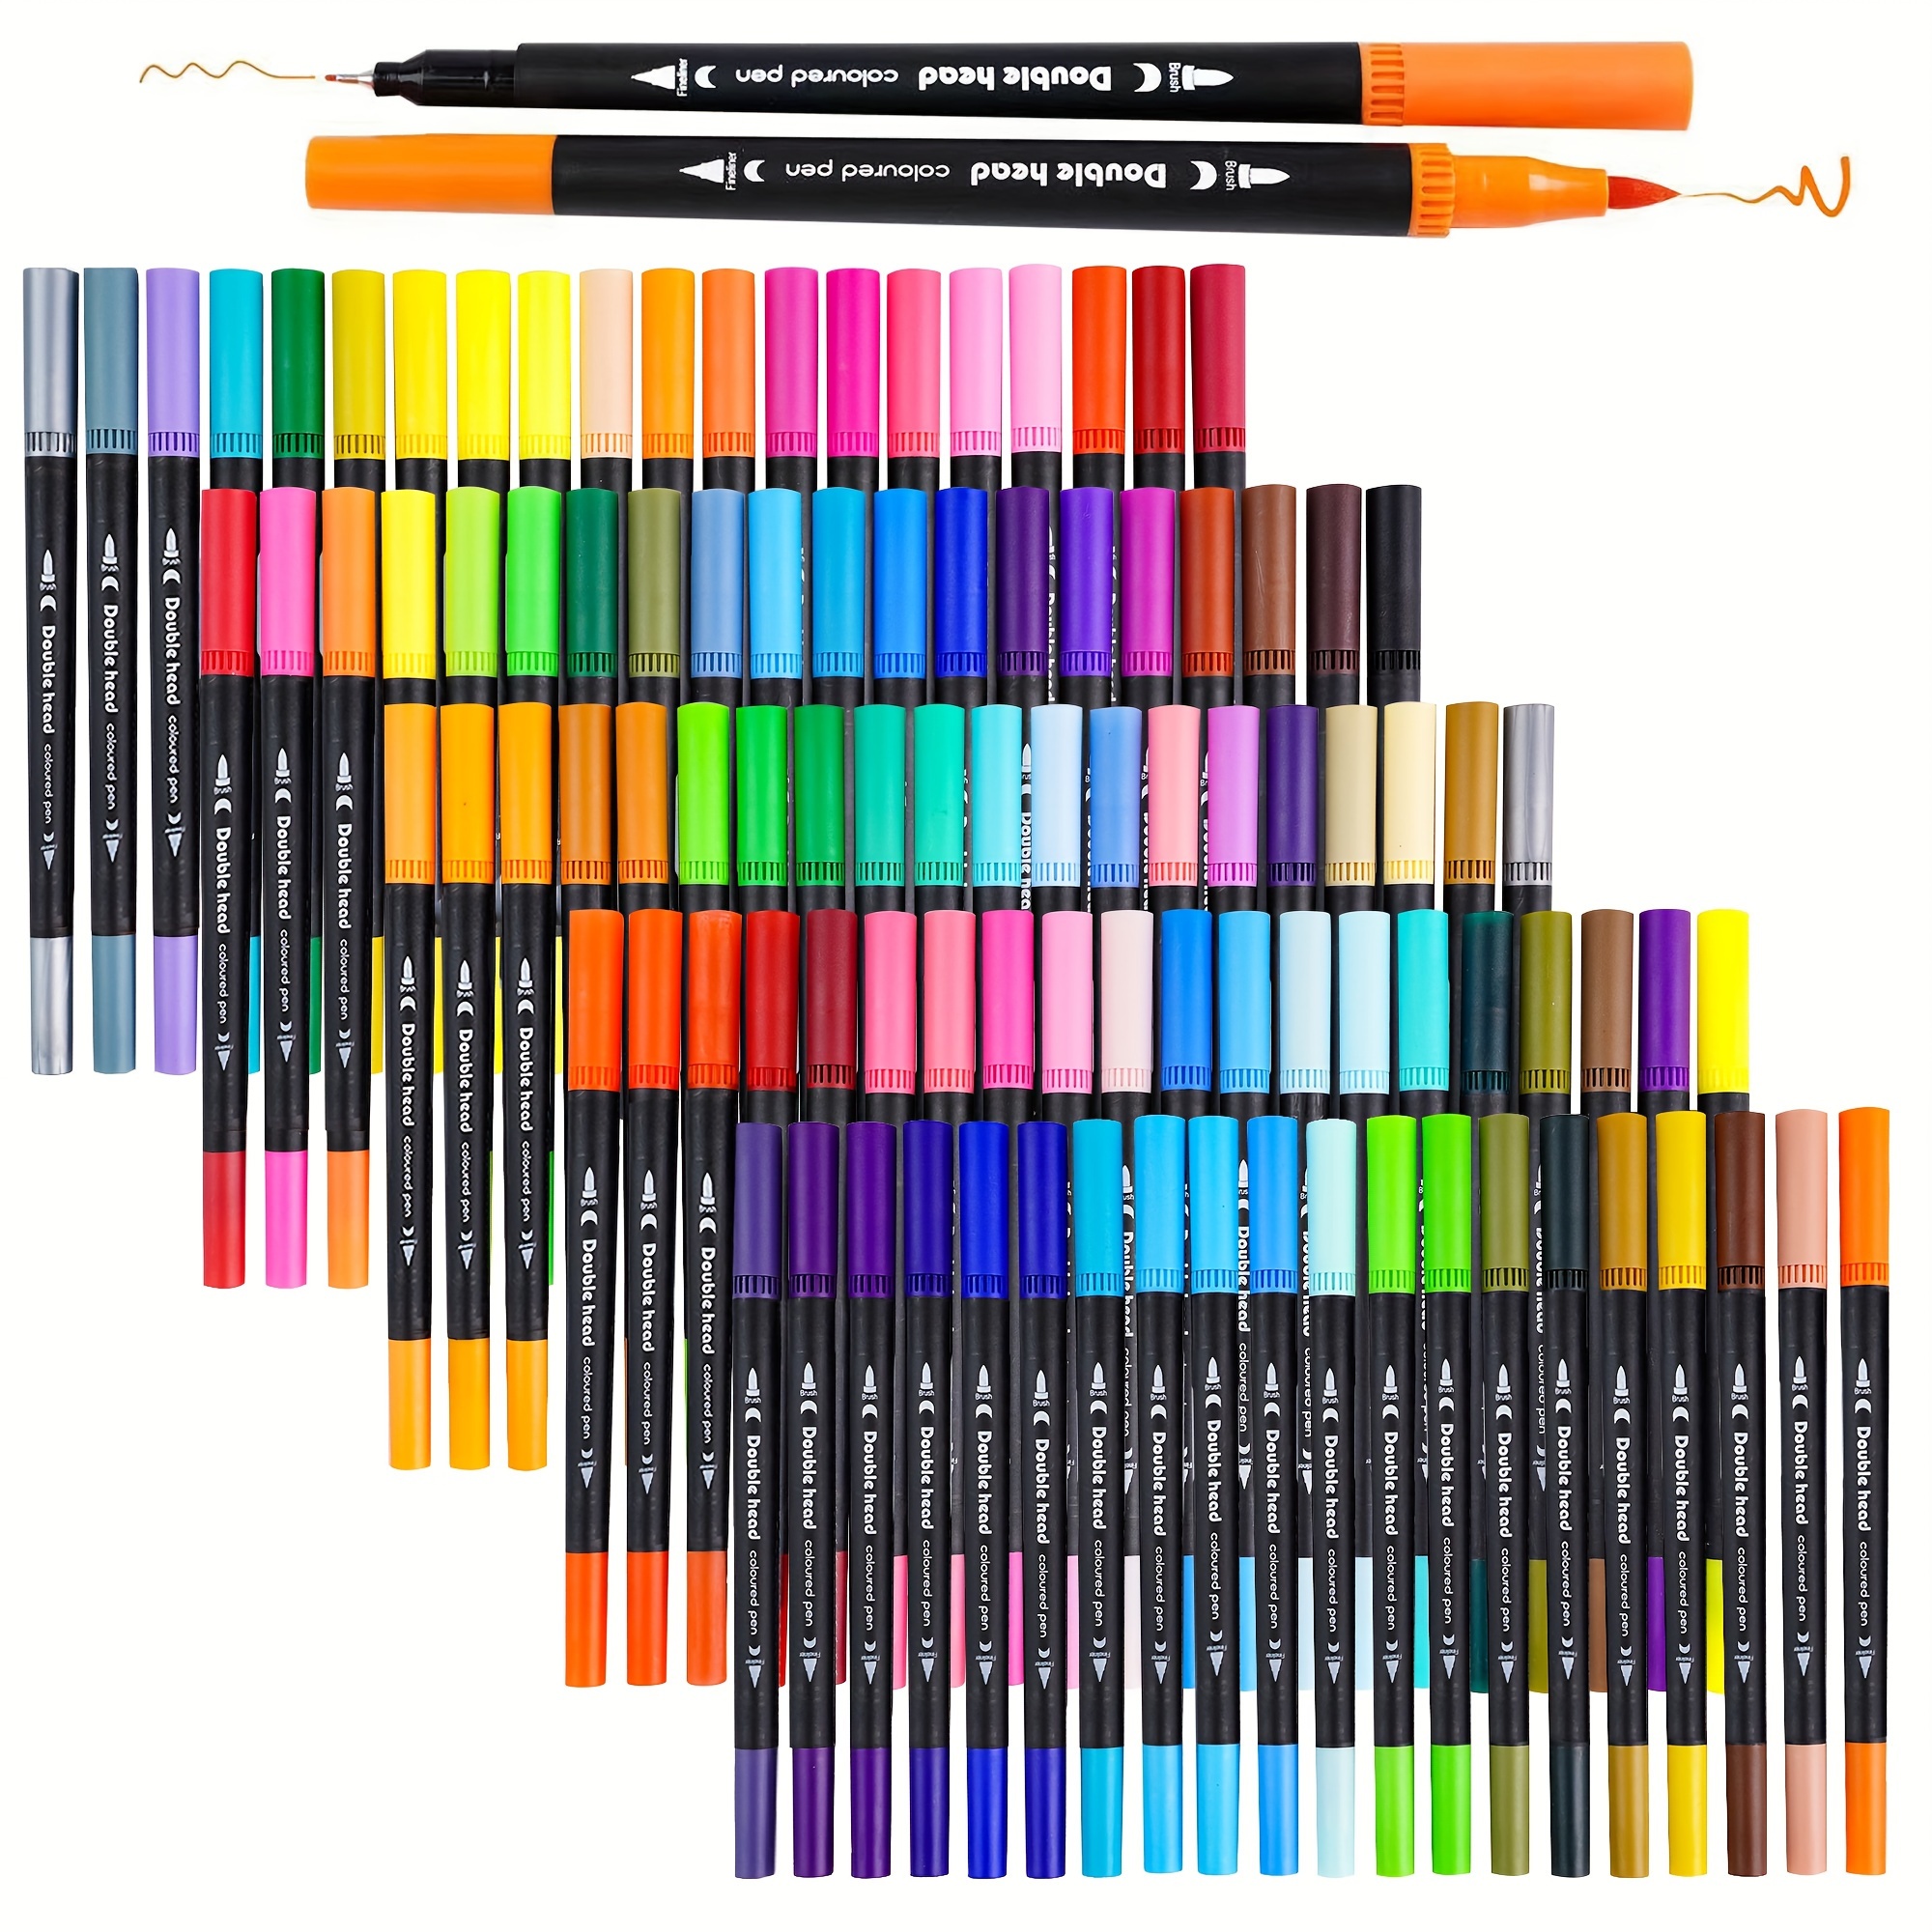 Dual Markers Brush Pens, 36 Fine Point Art Marker, Double Tip Colored Pen  for Adult Coloring Hand Lettering Writing Planner